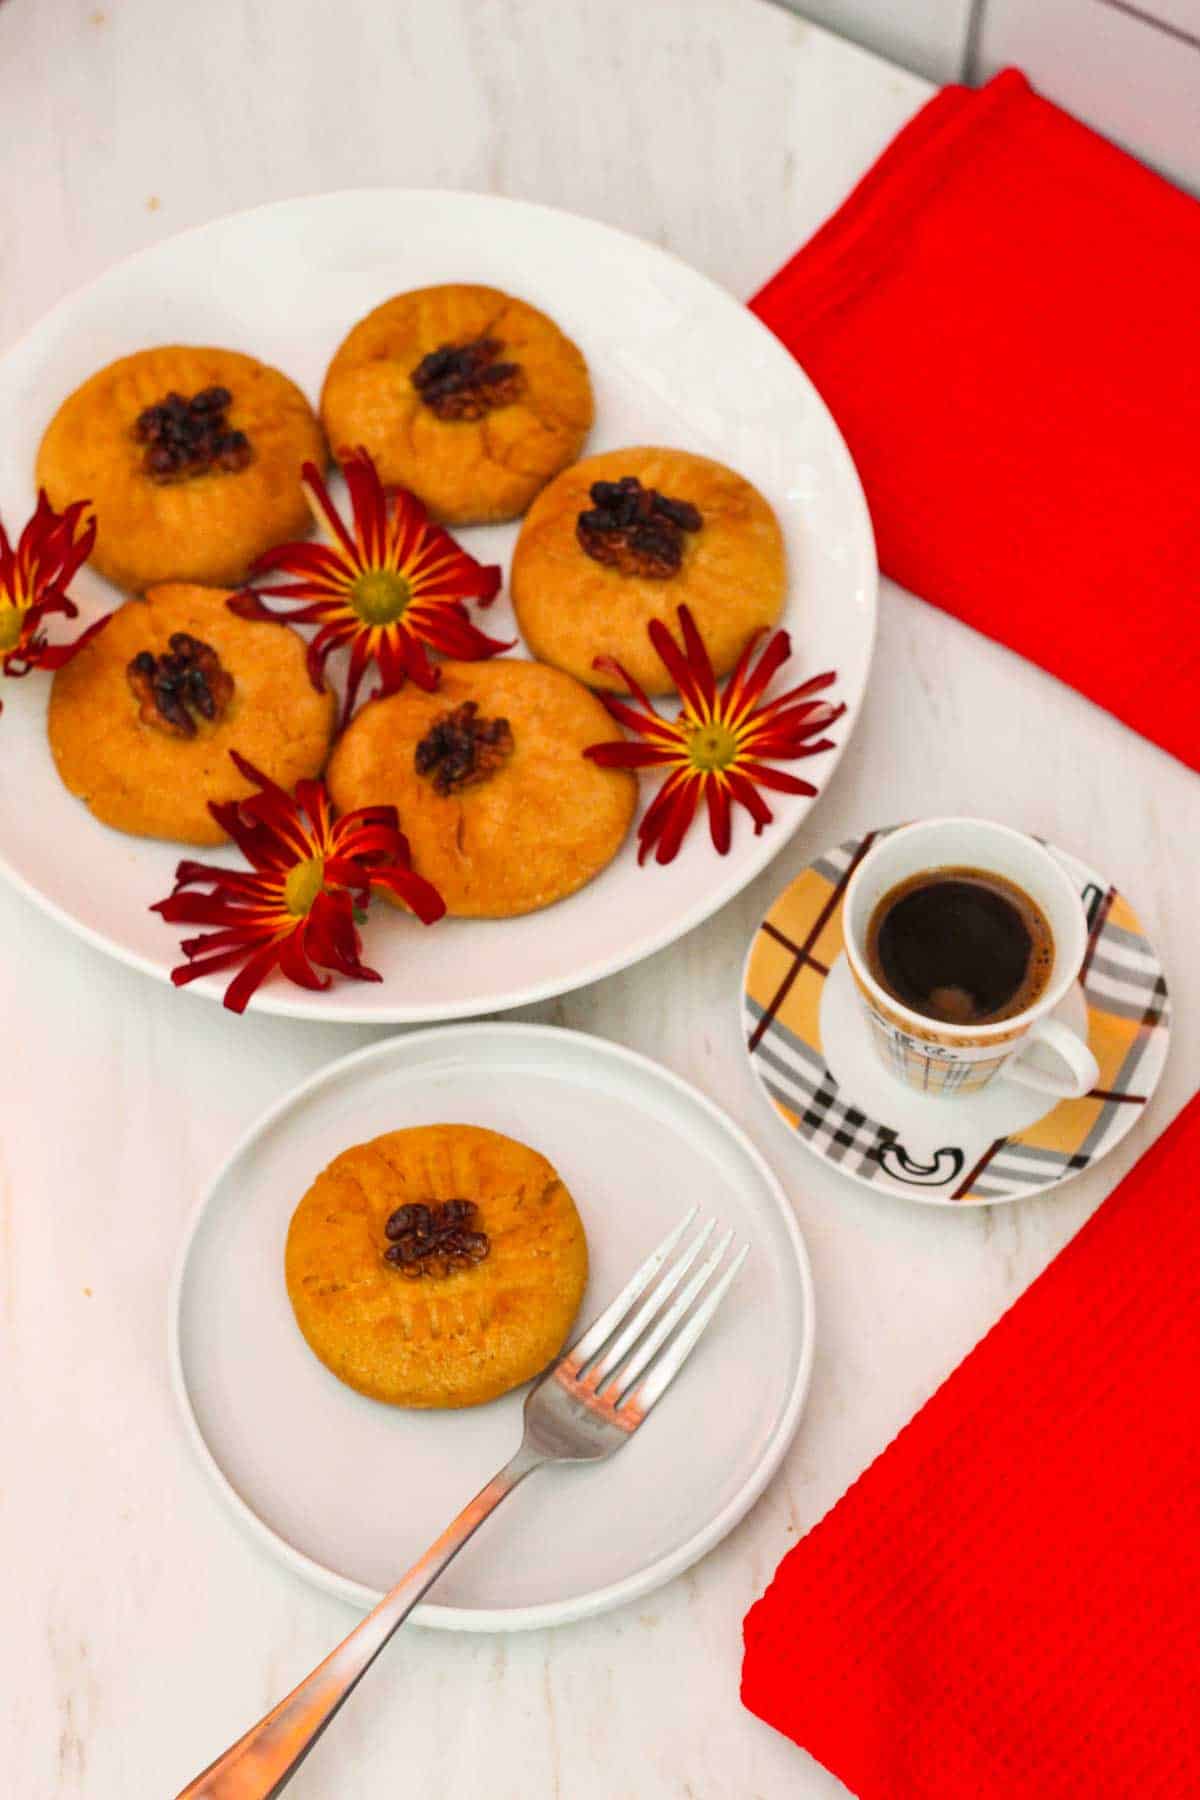 A plate with sheqerpare cookies garnished with flowers. Then there's a serving plate with one of the cookies and fork in it. We can also see a small coffee on the right hand side.